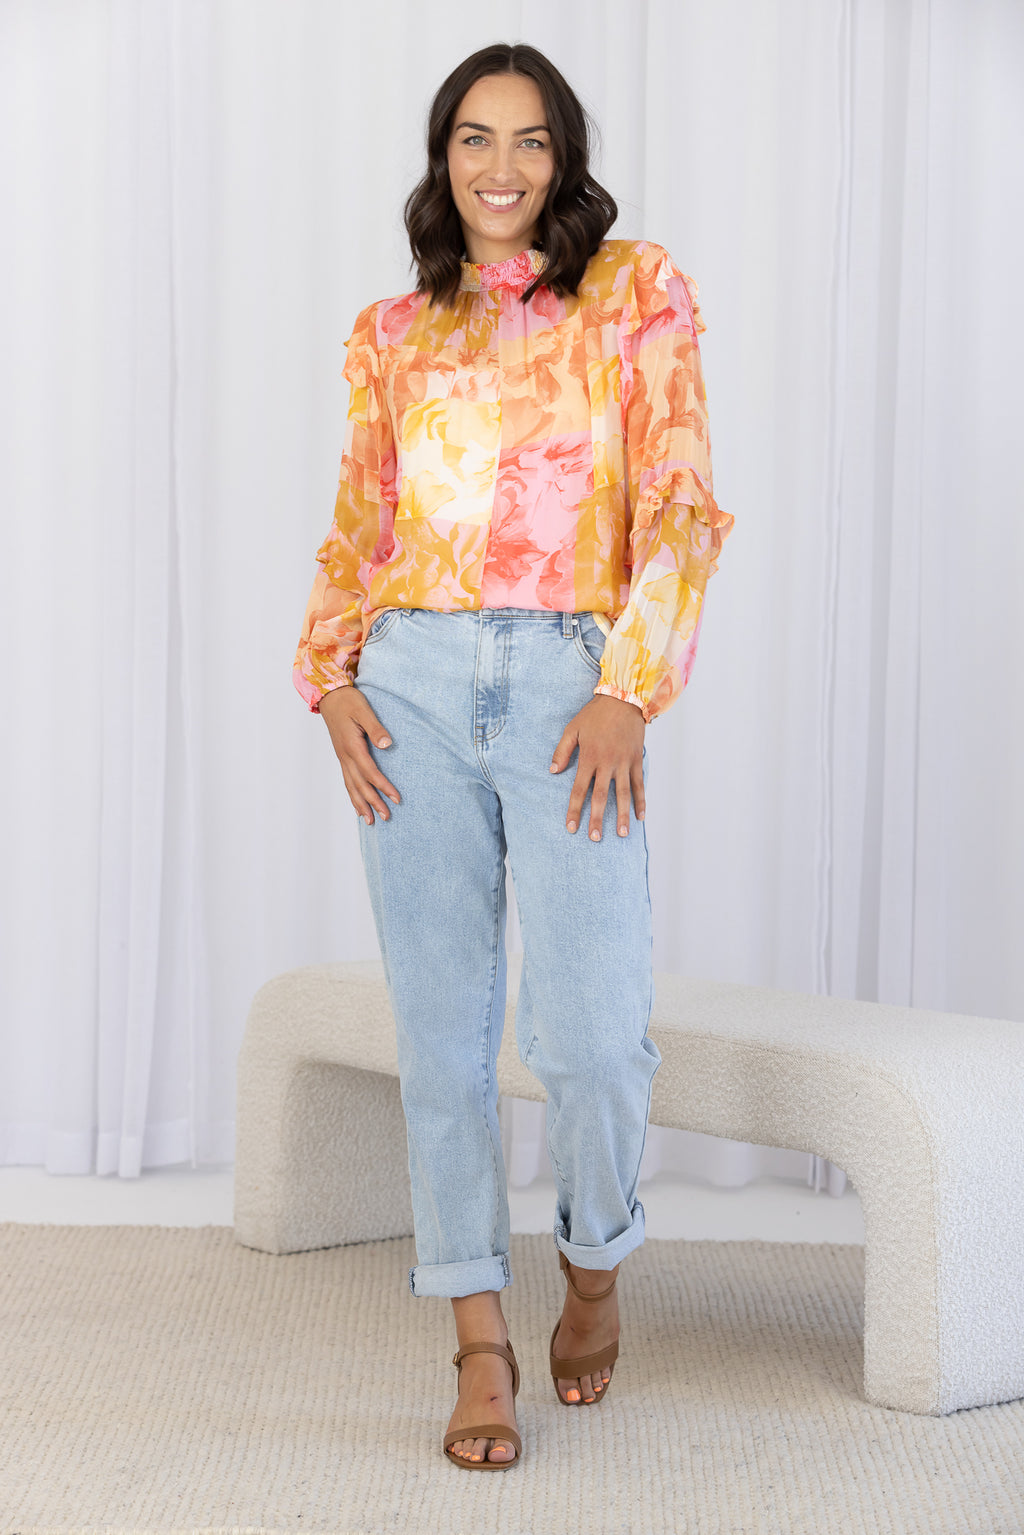 EARTHLY PARADISE LONG SLEEVE SHEER BLOUSE - Paradise Floral